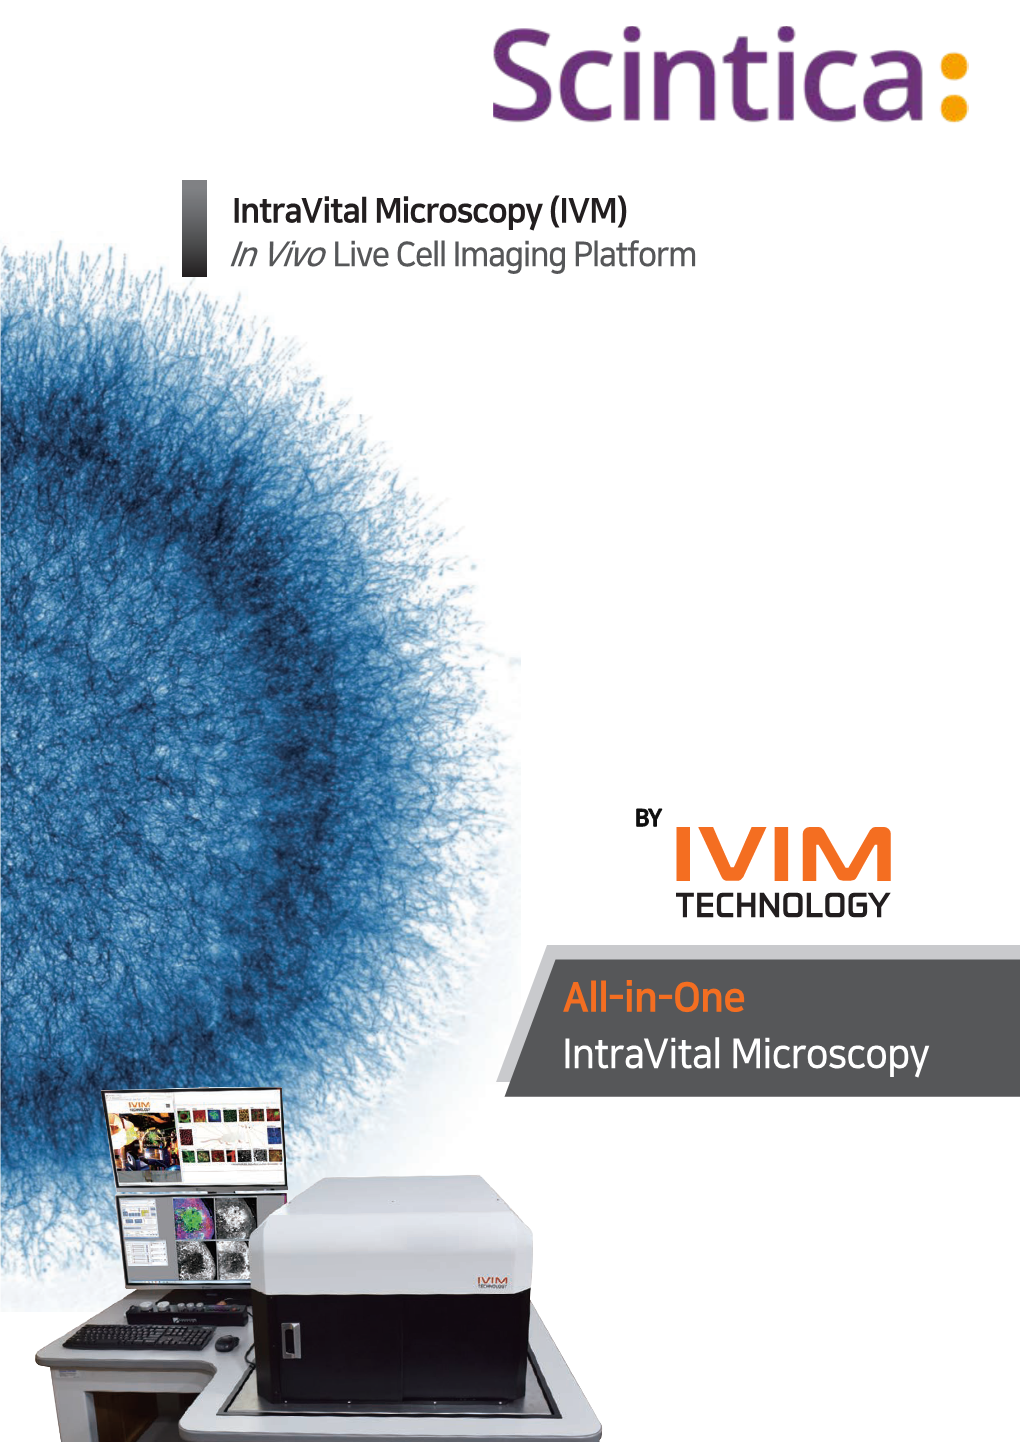 All-In-One Intravital Microscopy Contents